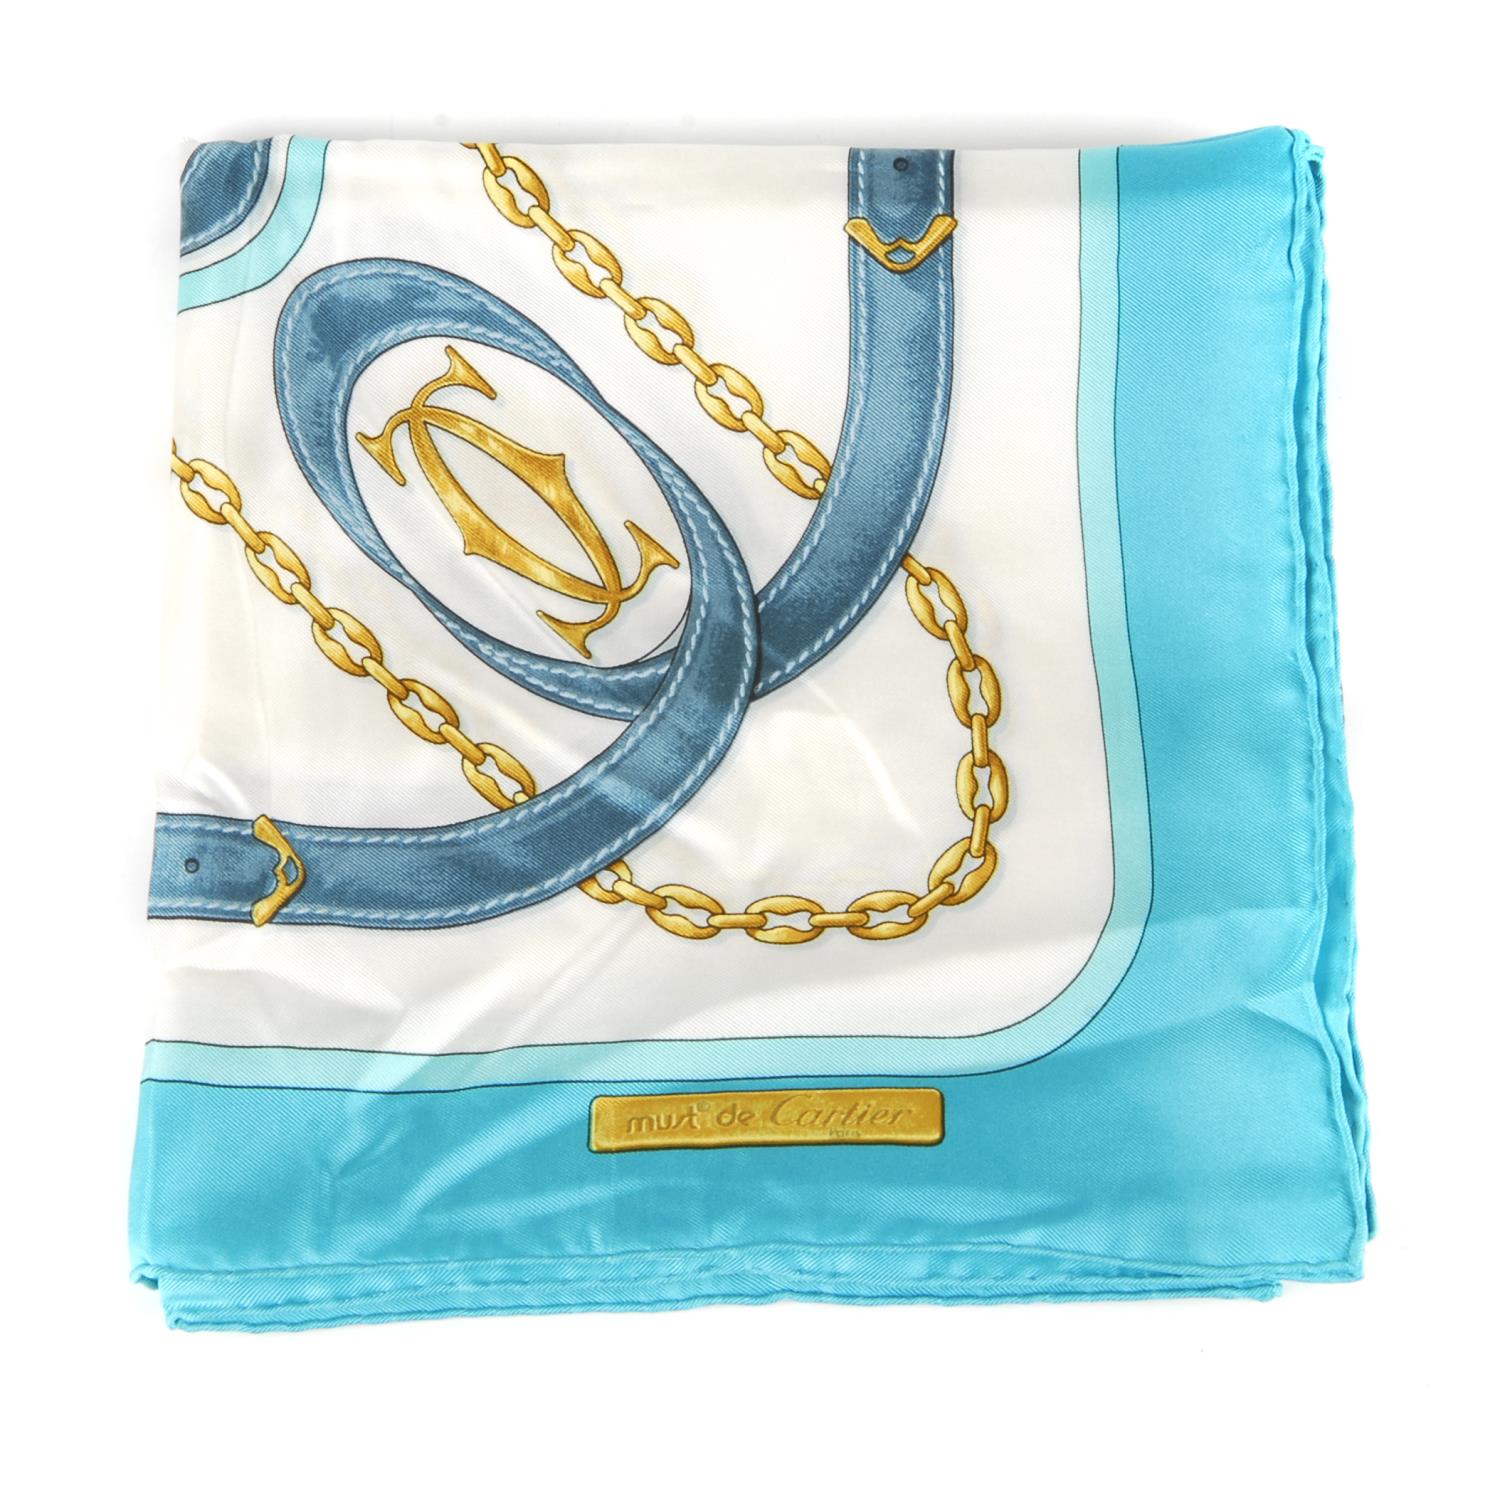 CARTIER - a 1980s Must De Cartier silk scarf. Featuring a stylised equestrian print with belt straps